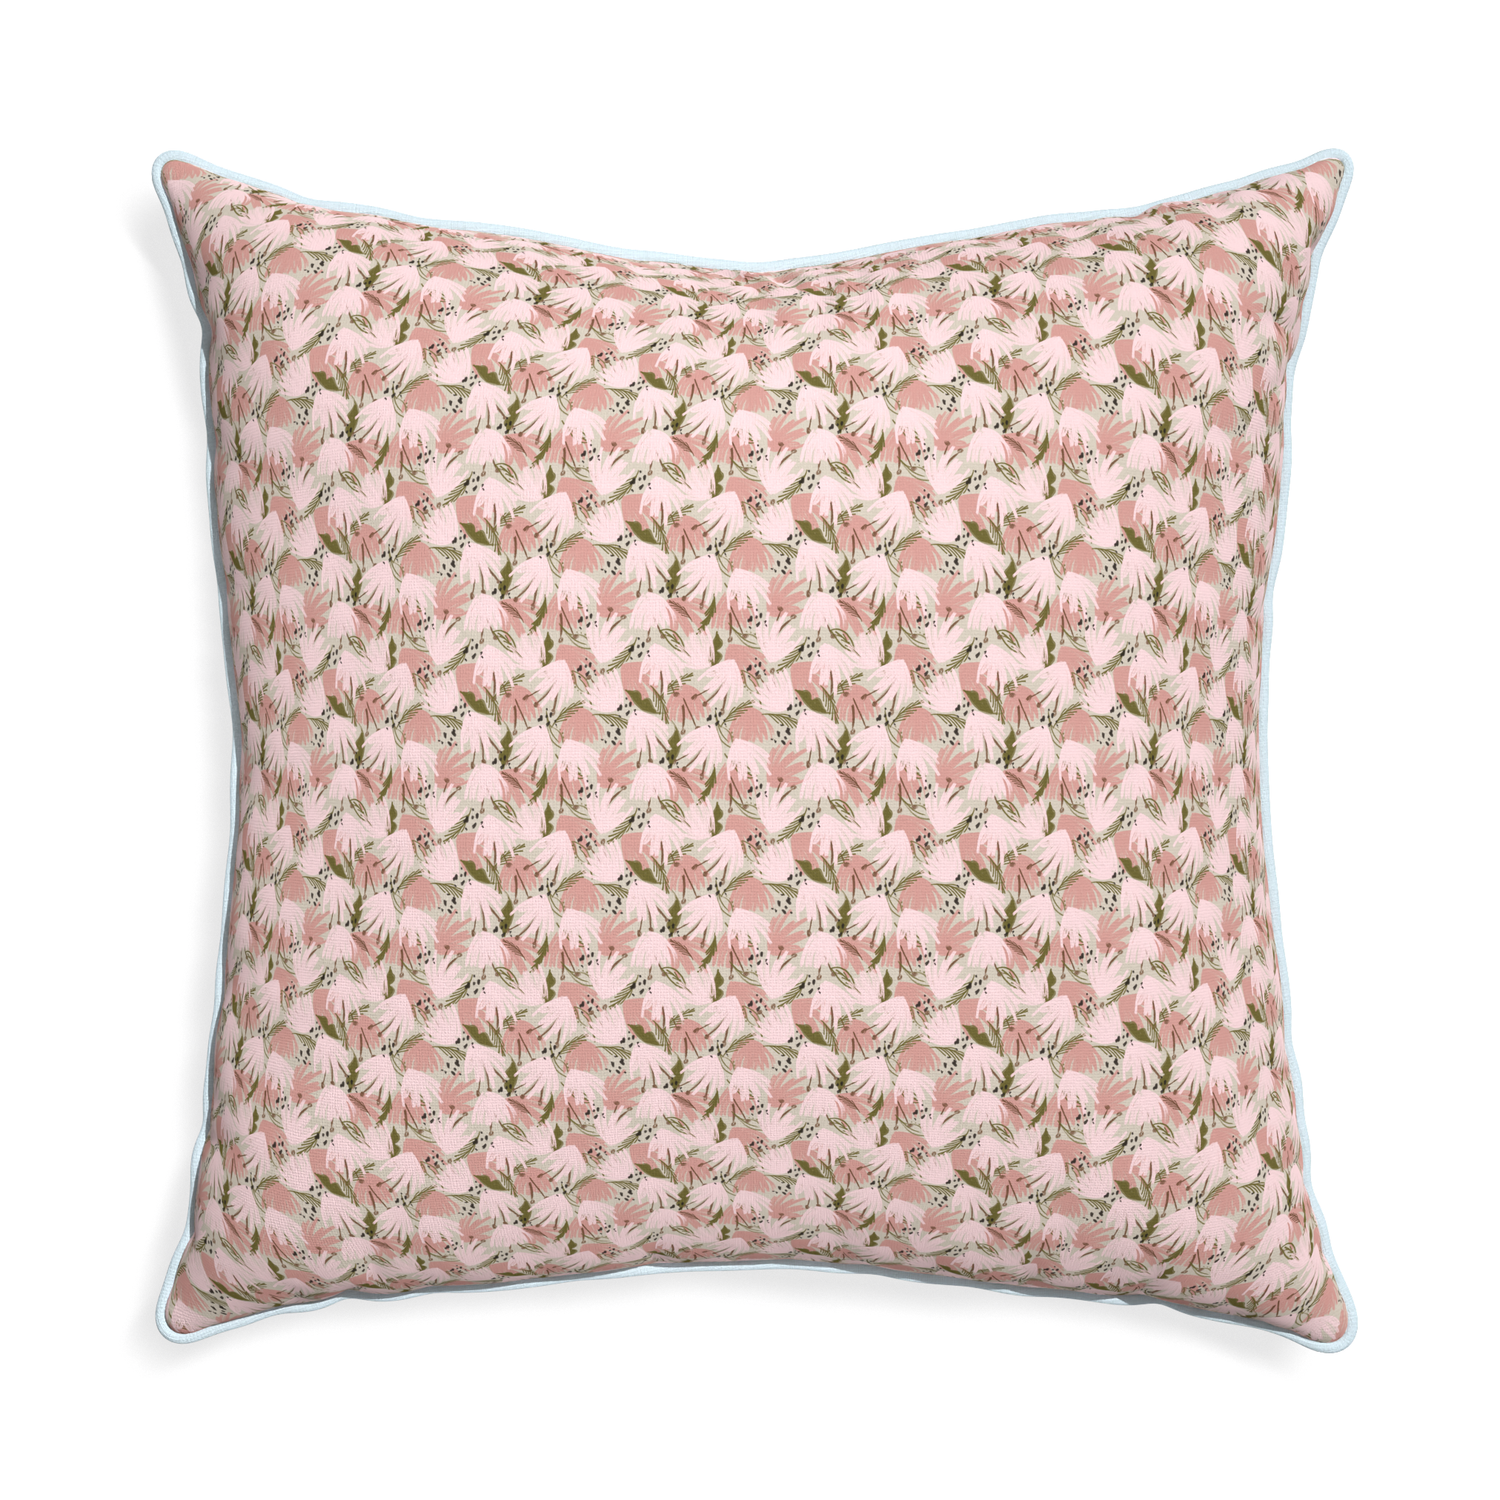 Euro-sham eden pink custom pink floralpillow with powder piping on white background